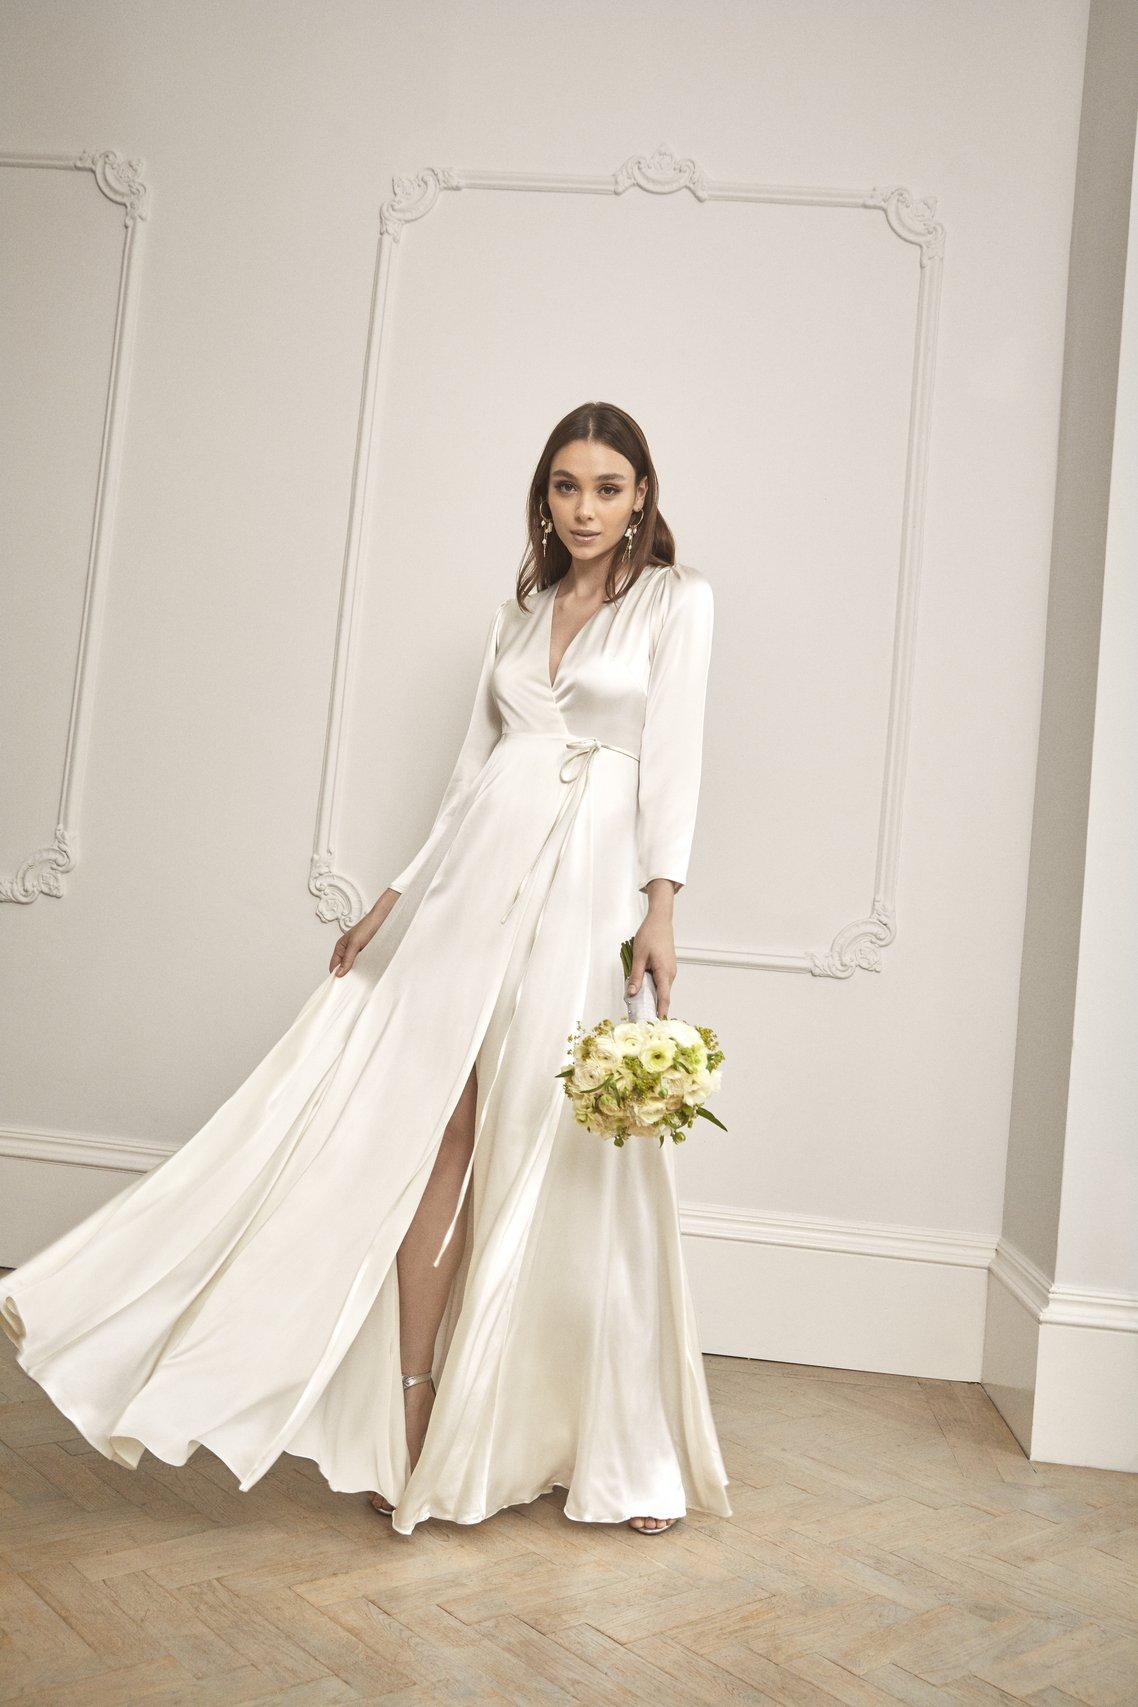 50 of the Best Simple Wedding Dresses for 2021 - hitched.co.uk